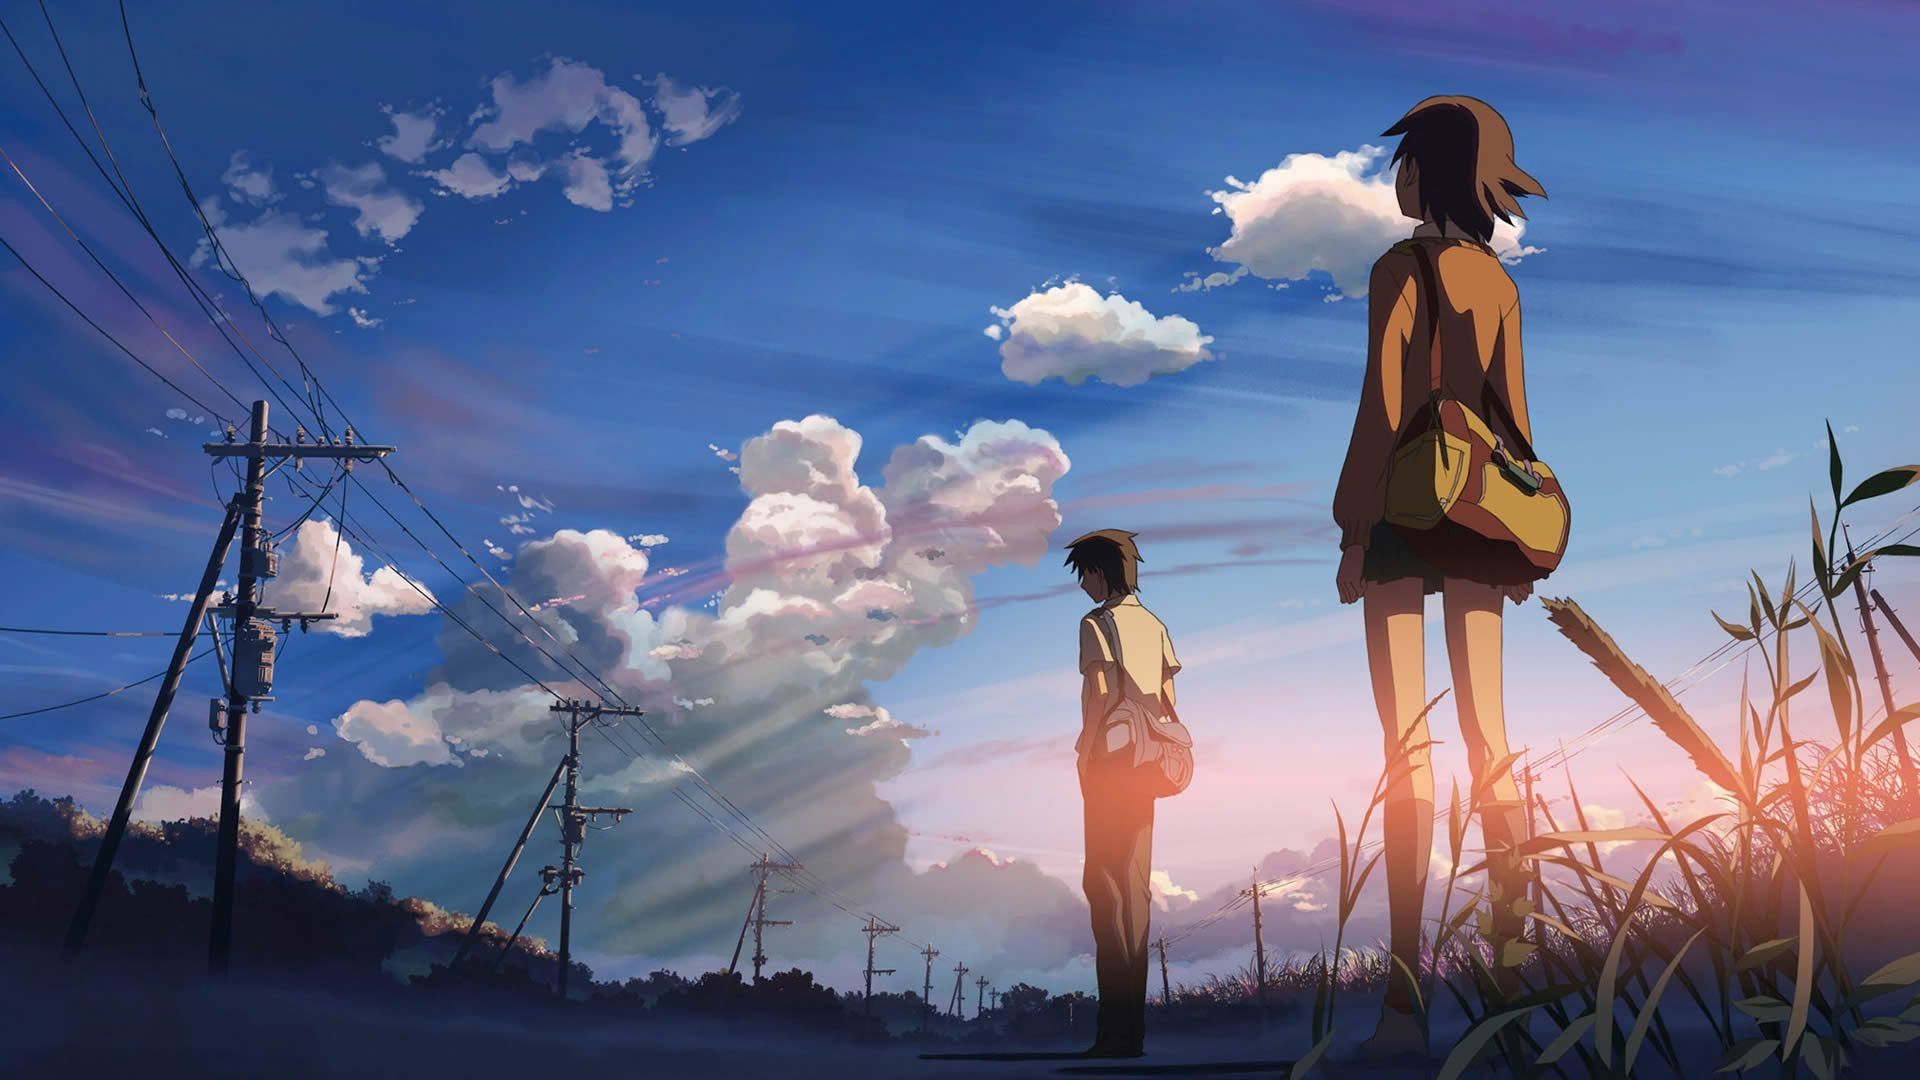 5 Centimeters Per Second is a 2007 Japanese animated drama film written and directed by Makoto Shinkai. - Anime, school, blue anime